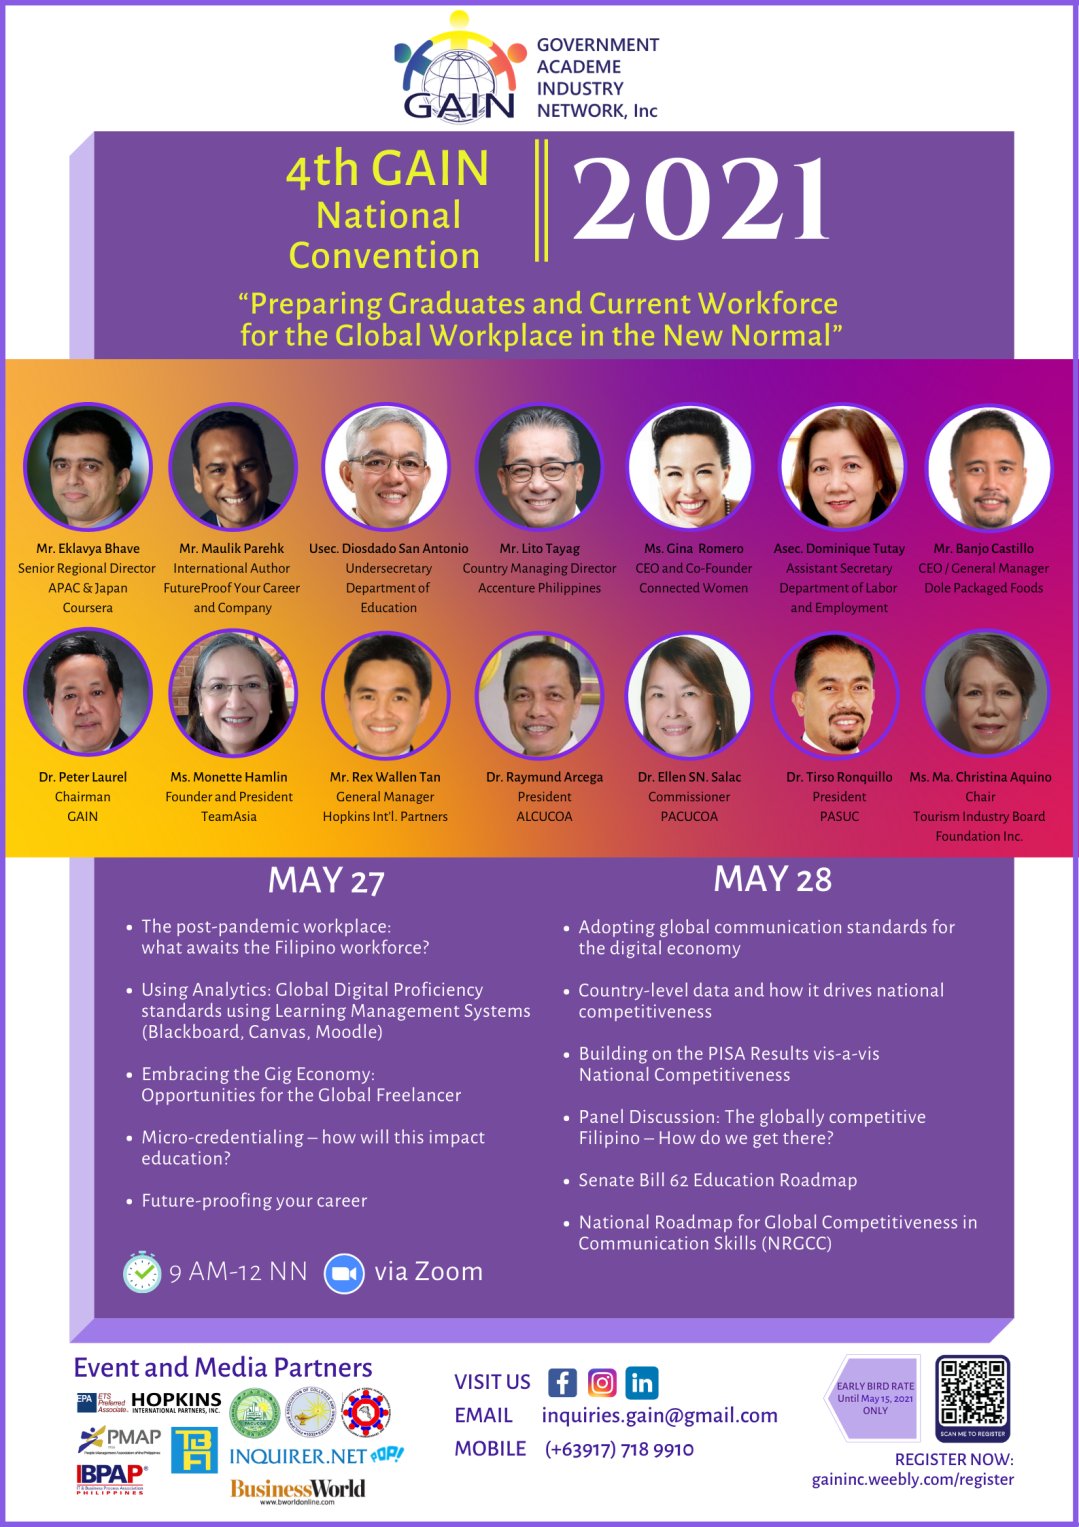  The 4th GAIN National Convention (May 27-28, 2021)